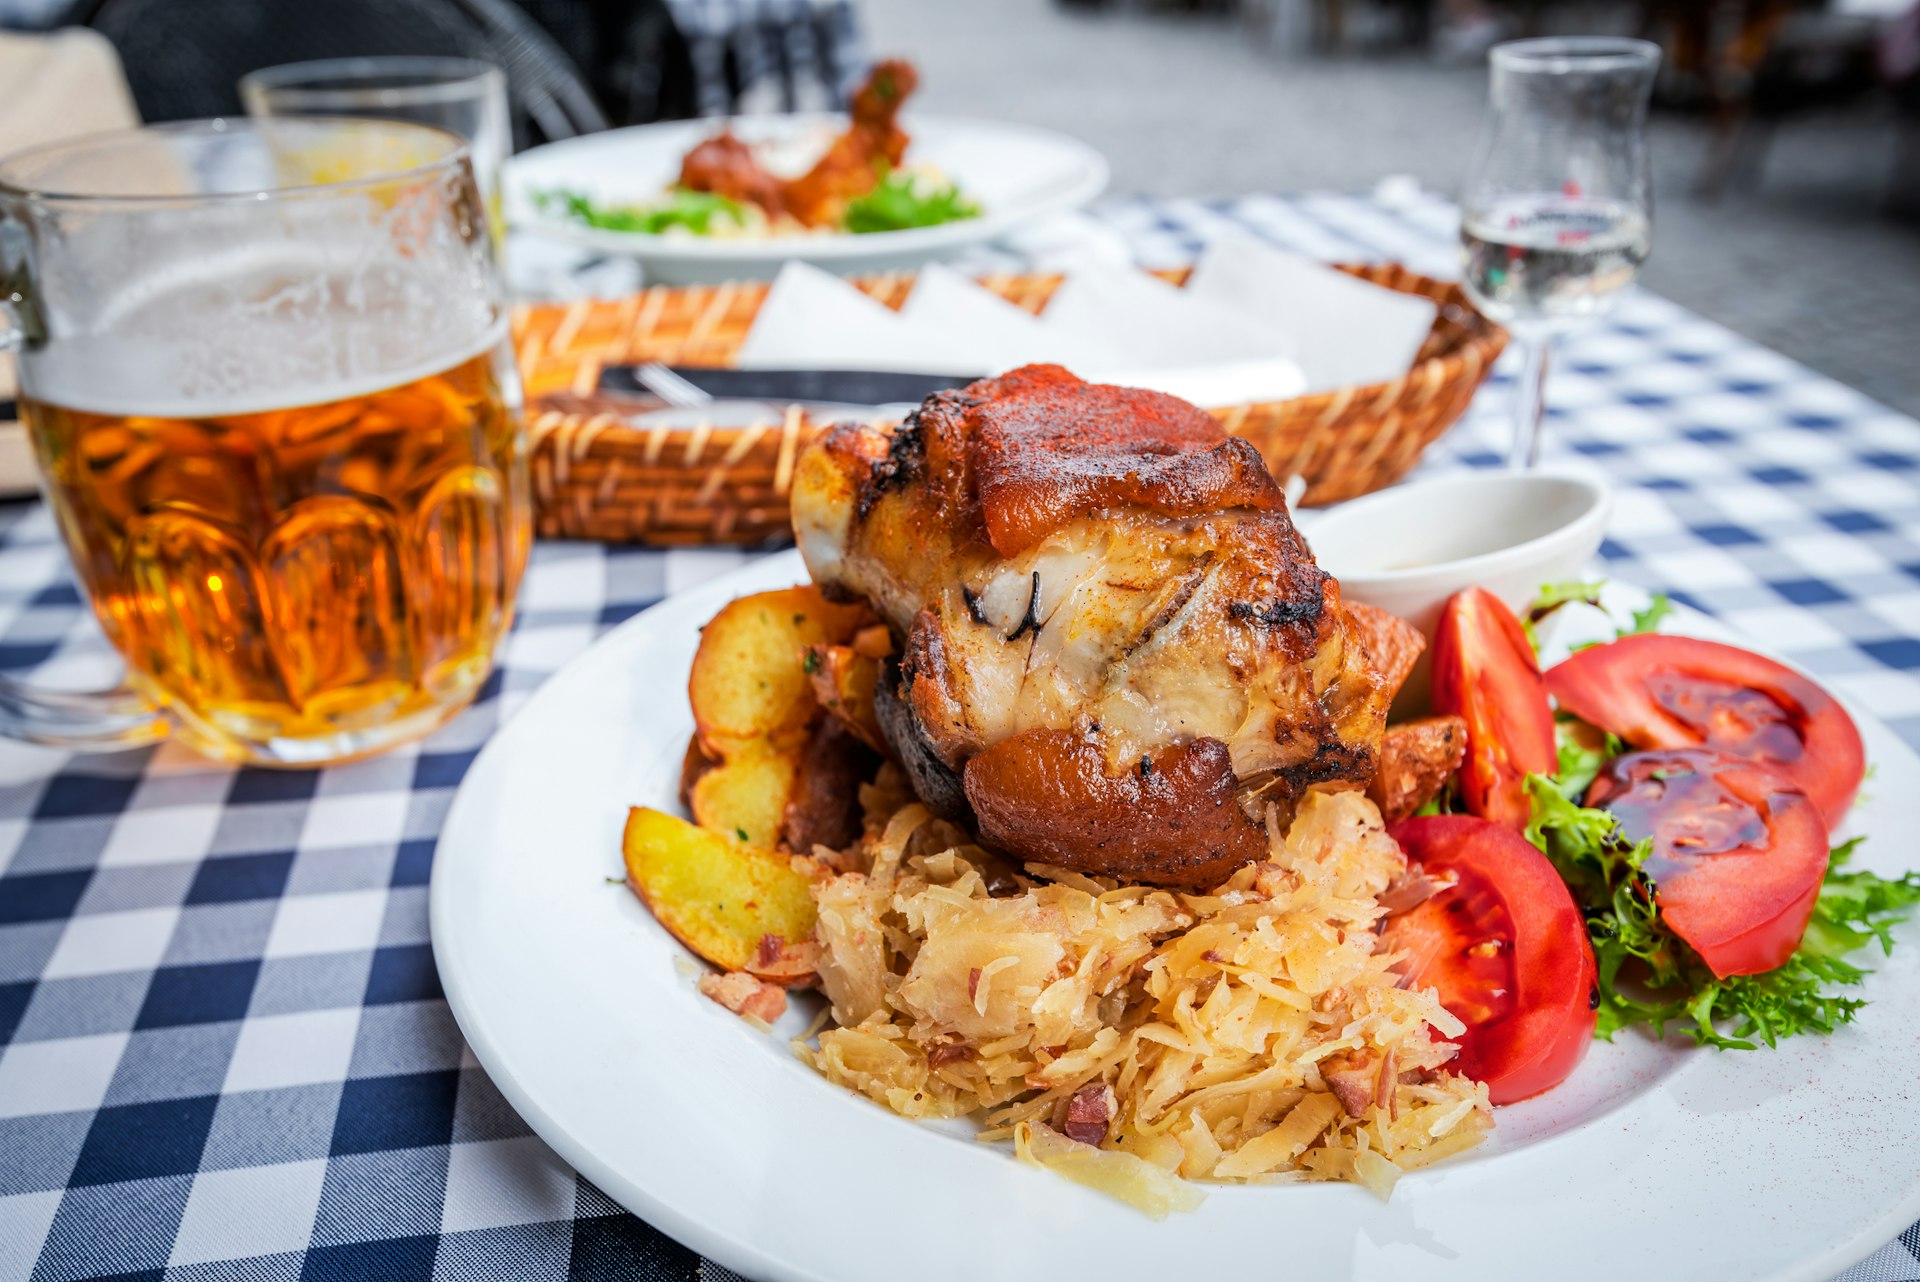 A plate of food with cabbage, salad and potatoes surrounding a huge hunk of pork